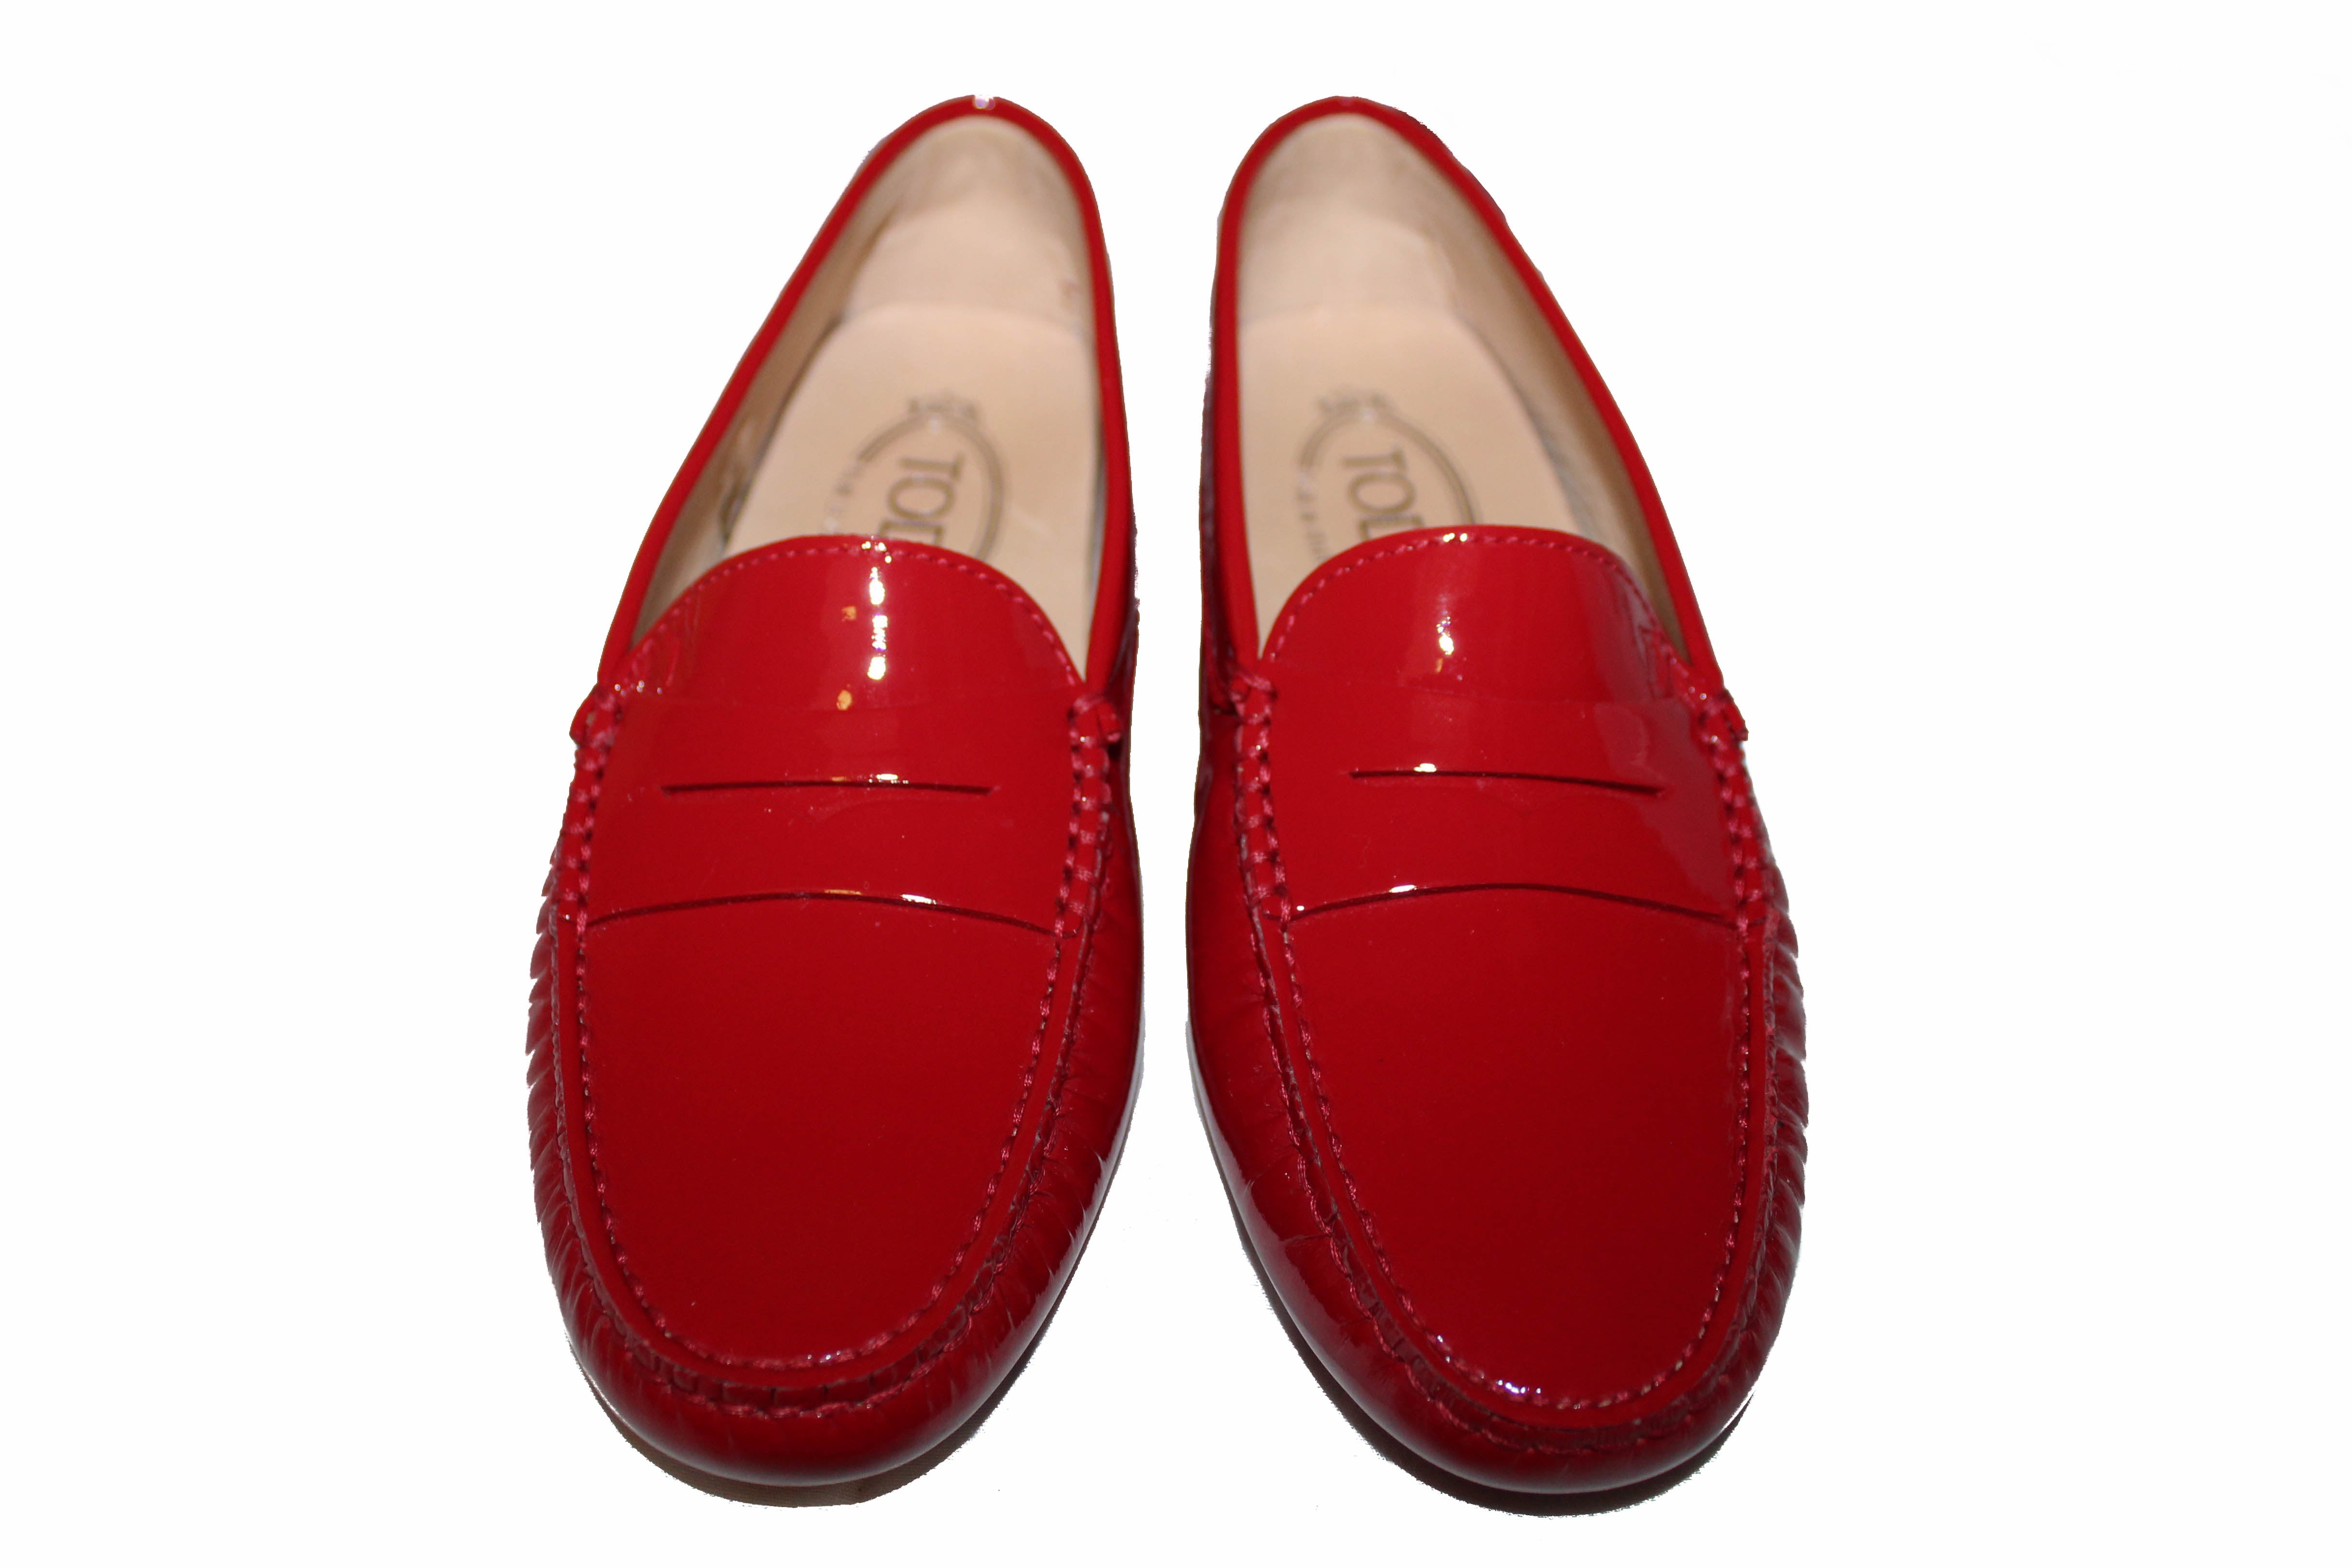 patent leather loafer womens